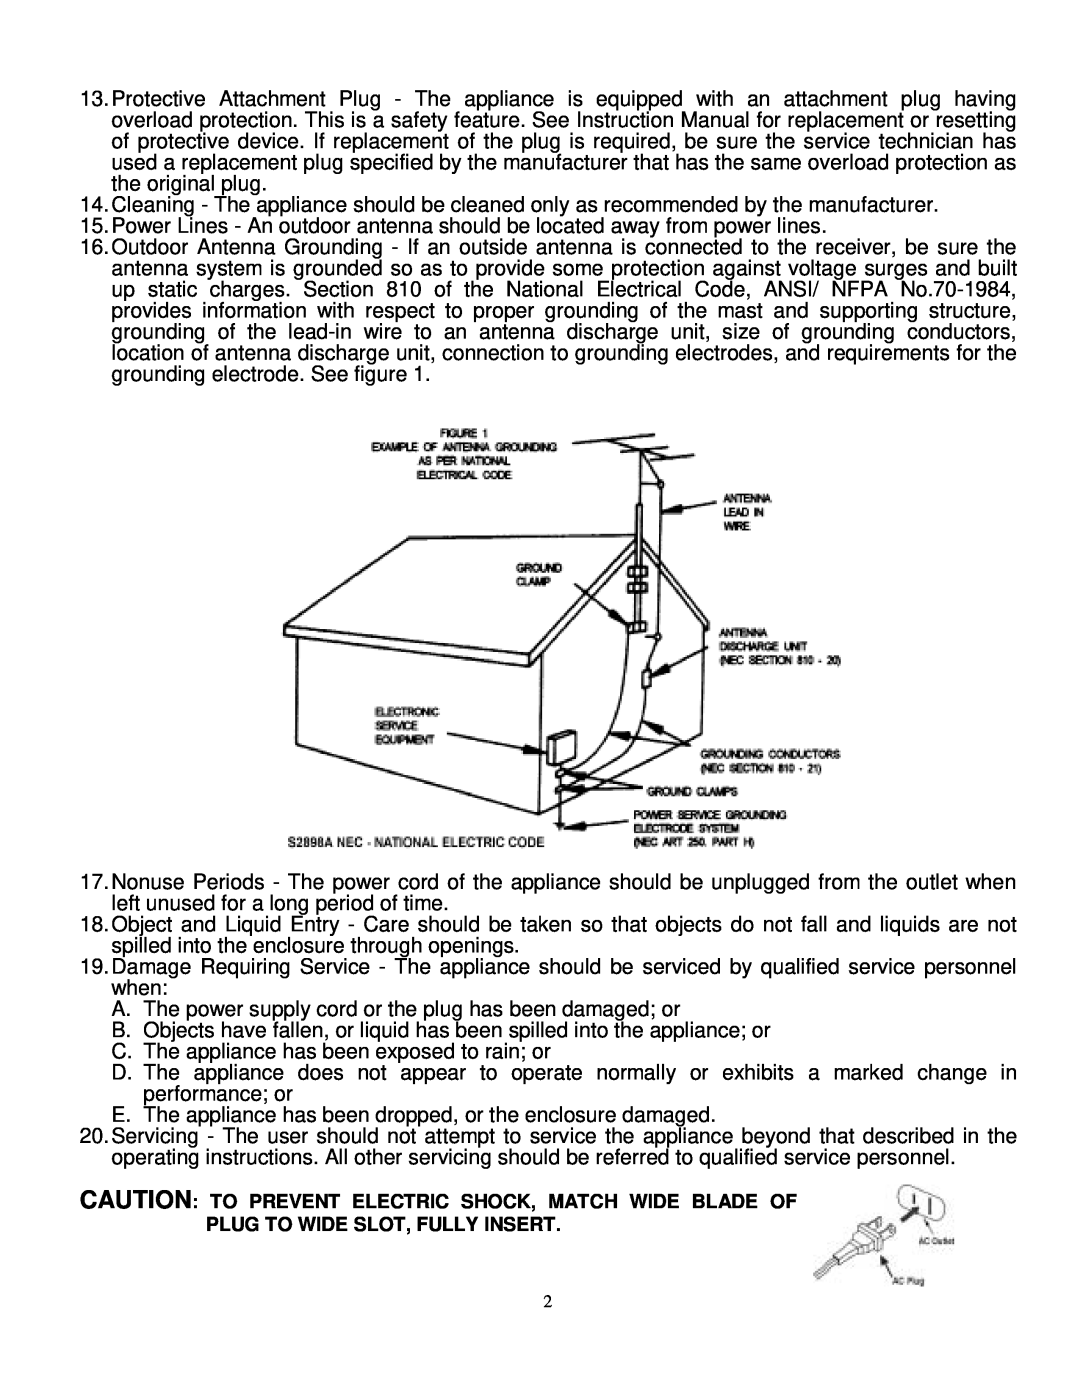 Jensen JMC-326 instruction manual C.The appliance has been exposed to rain or 